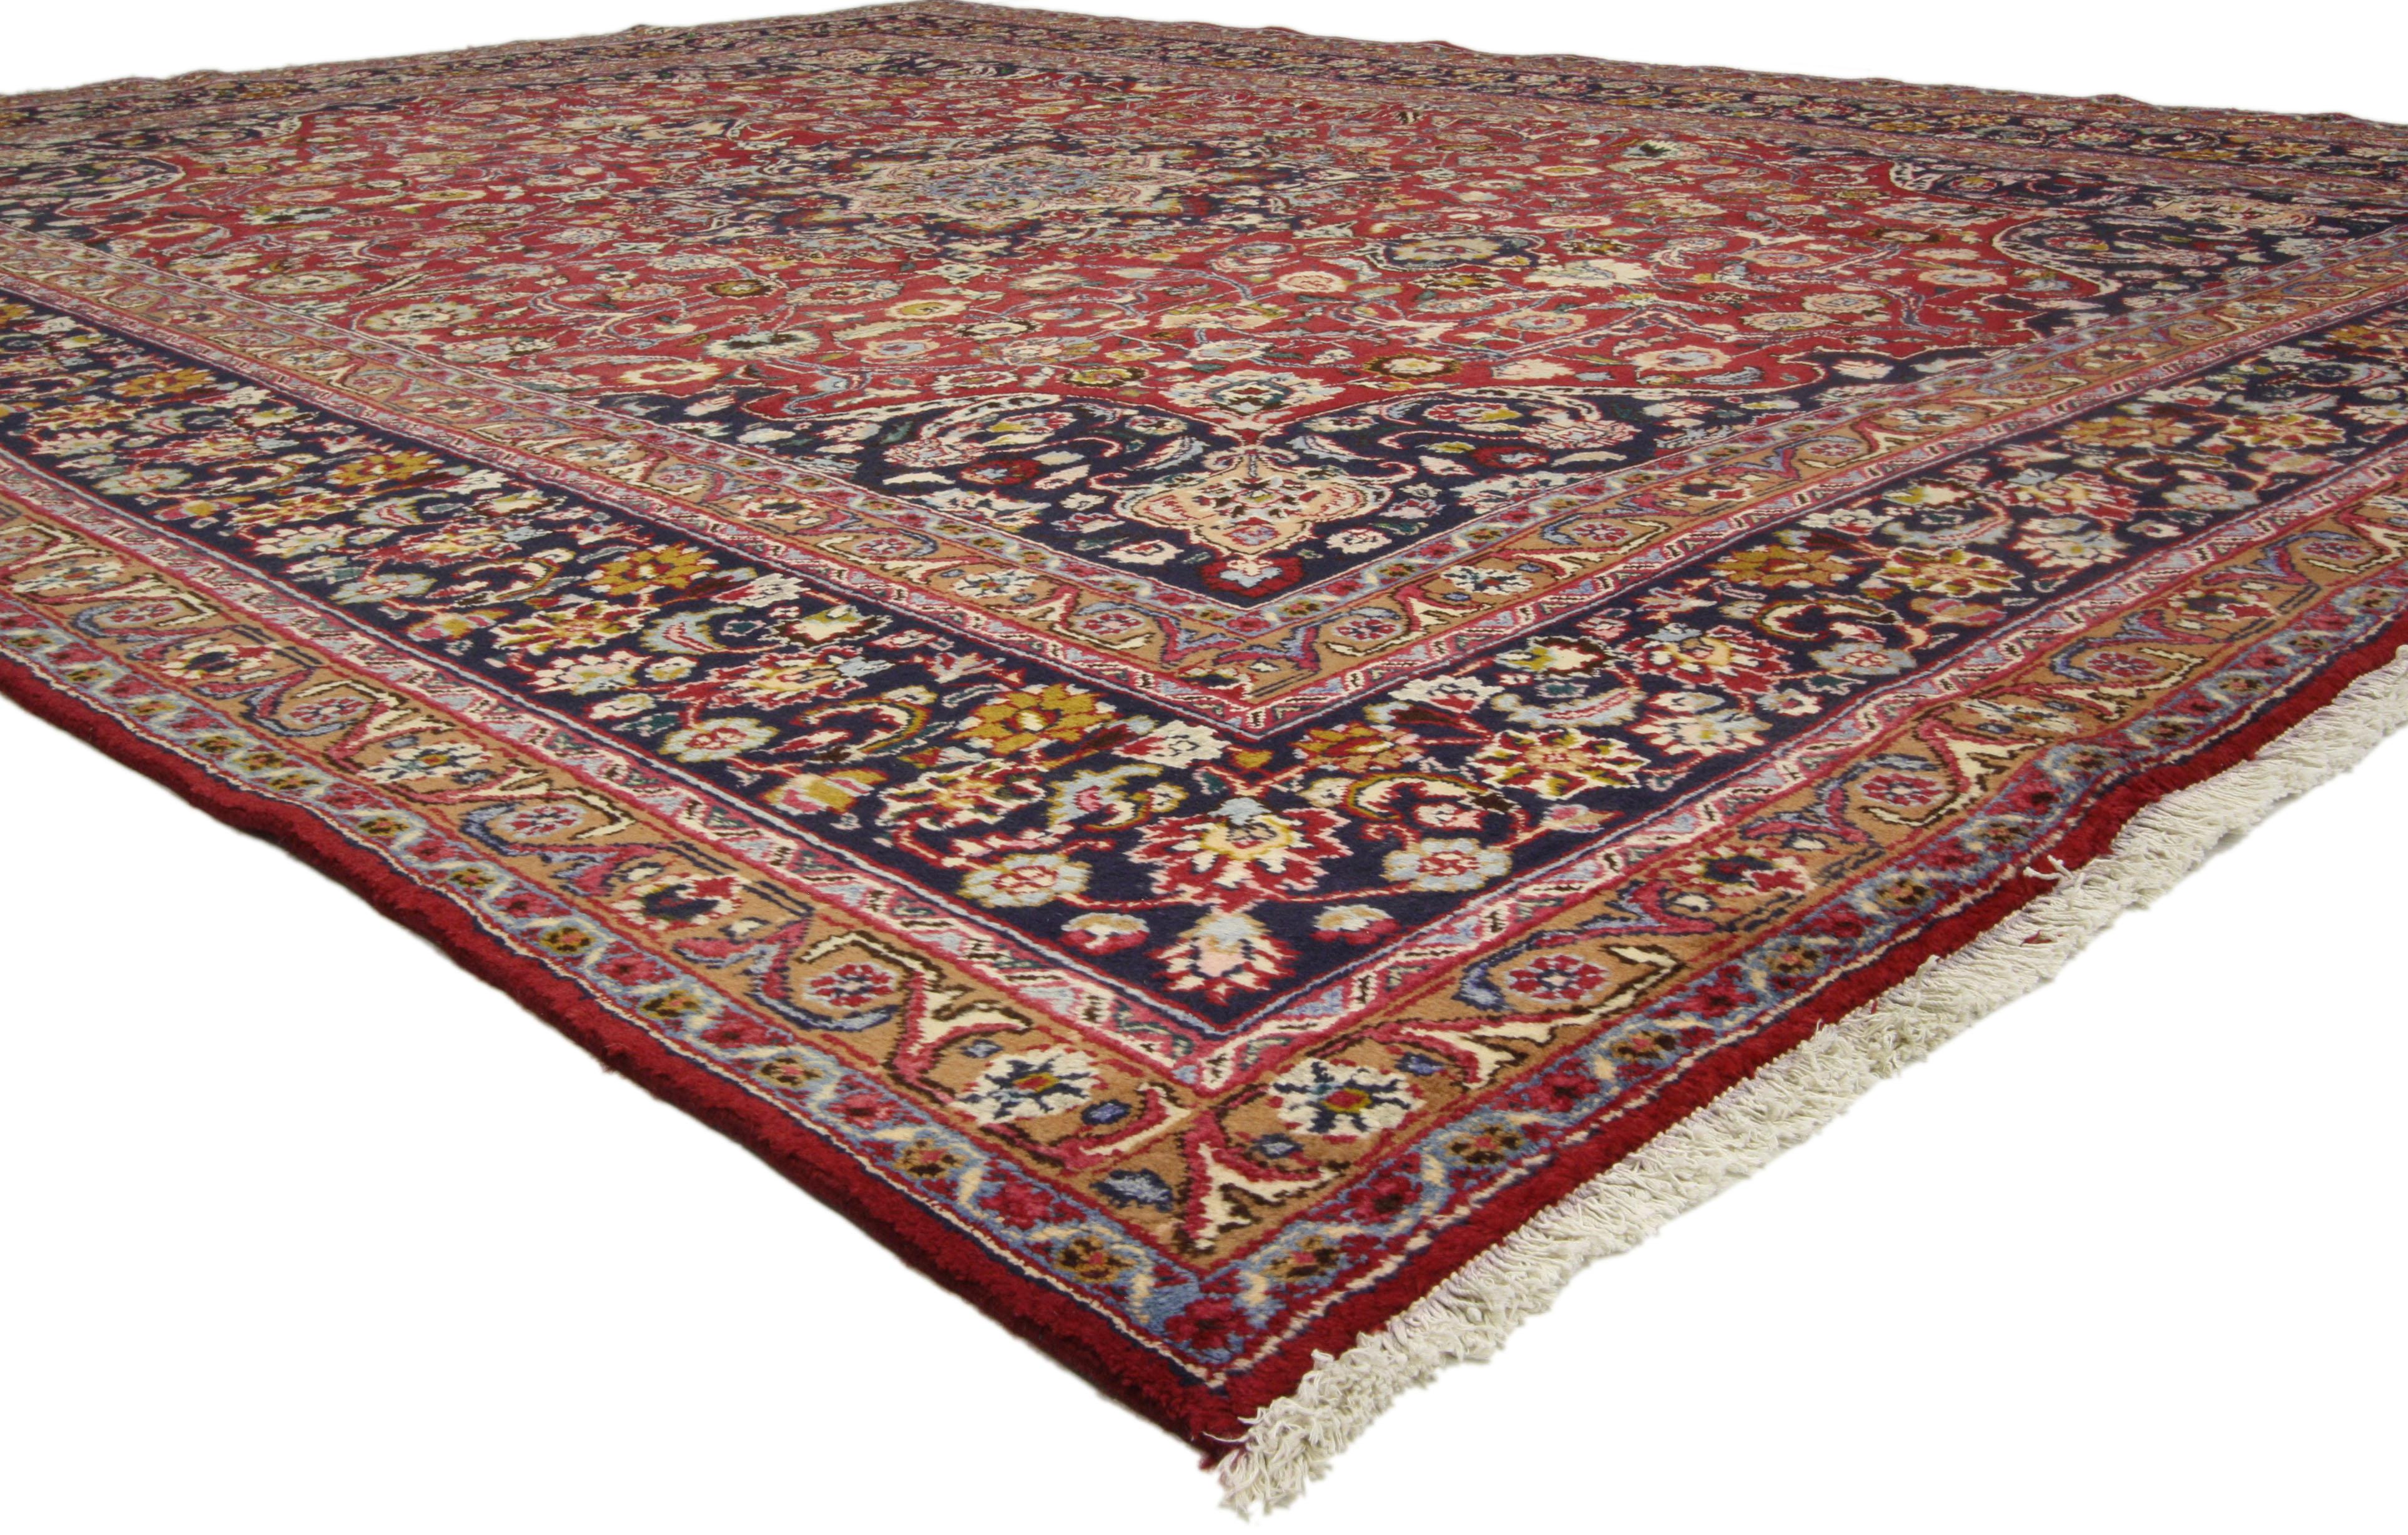 74946 Vintage Red Persian Mashhad Rug, 09'07 X 12'09. Ravishing and refined, this hand-knotted wool vintage Persian Mashhad area rug exudes elegance with its intricate design. At its center lies an eight-point cusped palmette medallion, surrounded